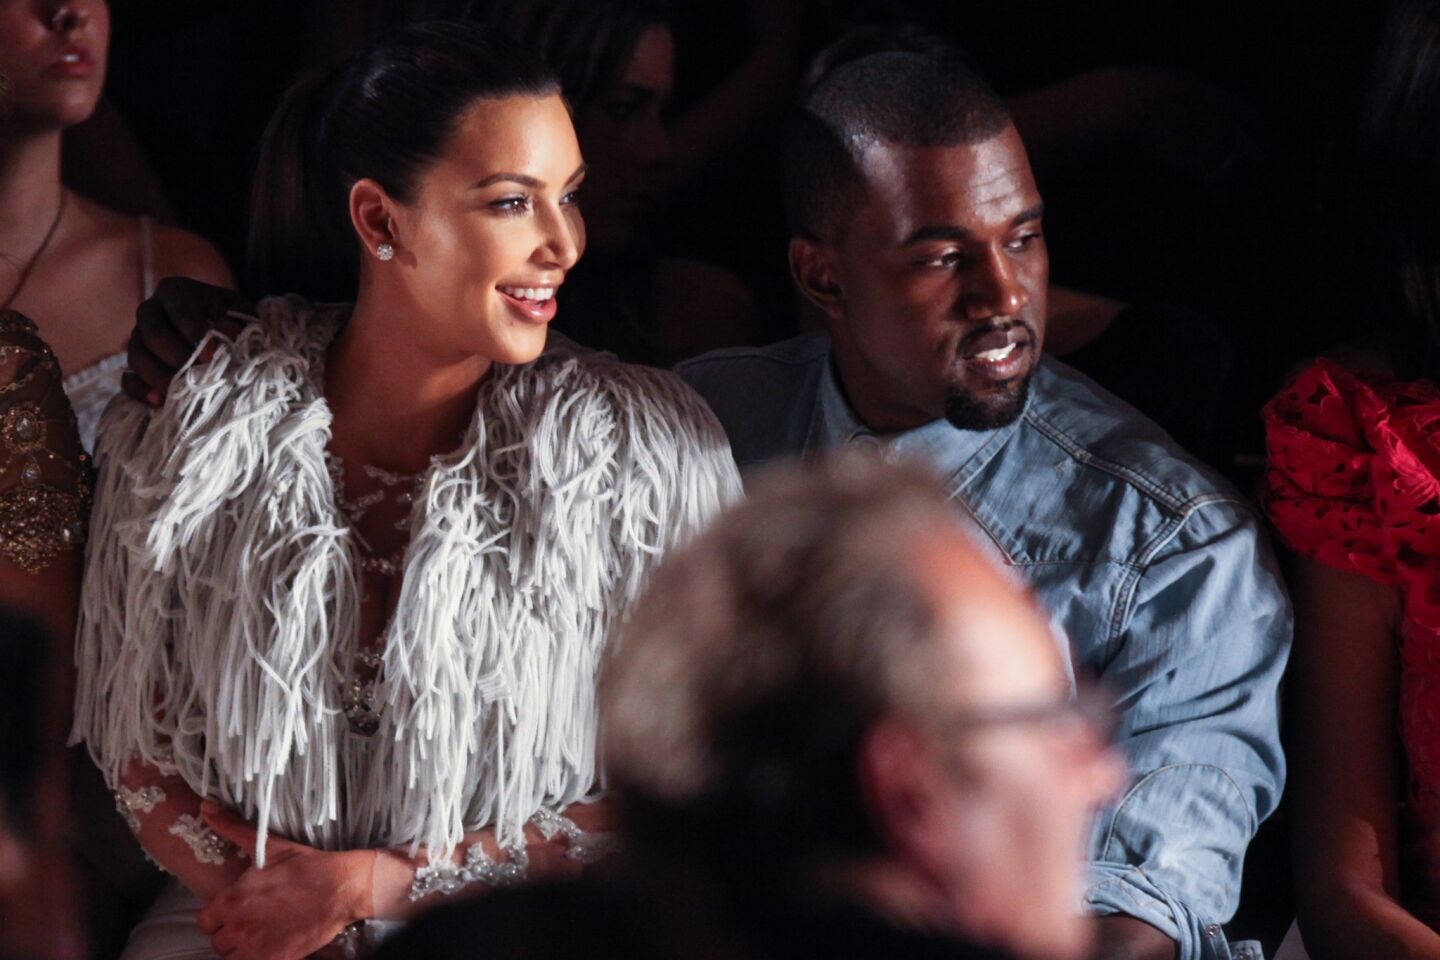 Kim Kardashian and rapper Kanye West attend the Marchesa spring 2013 fashion show during New York Fashion Week on Sept. 12, 2012.